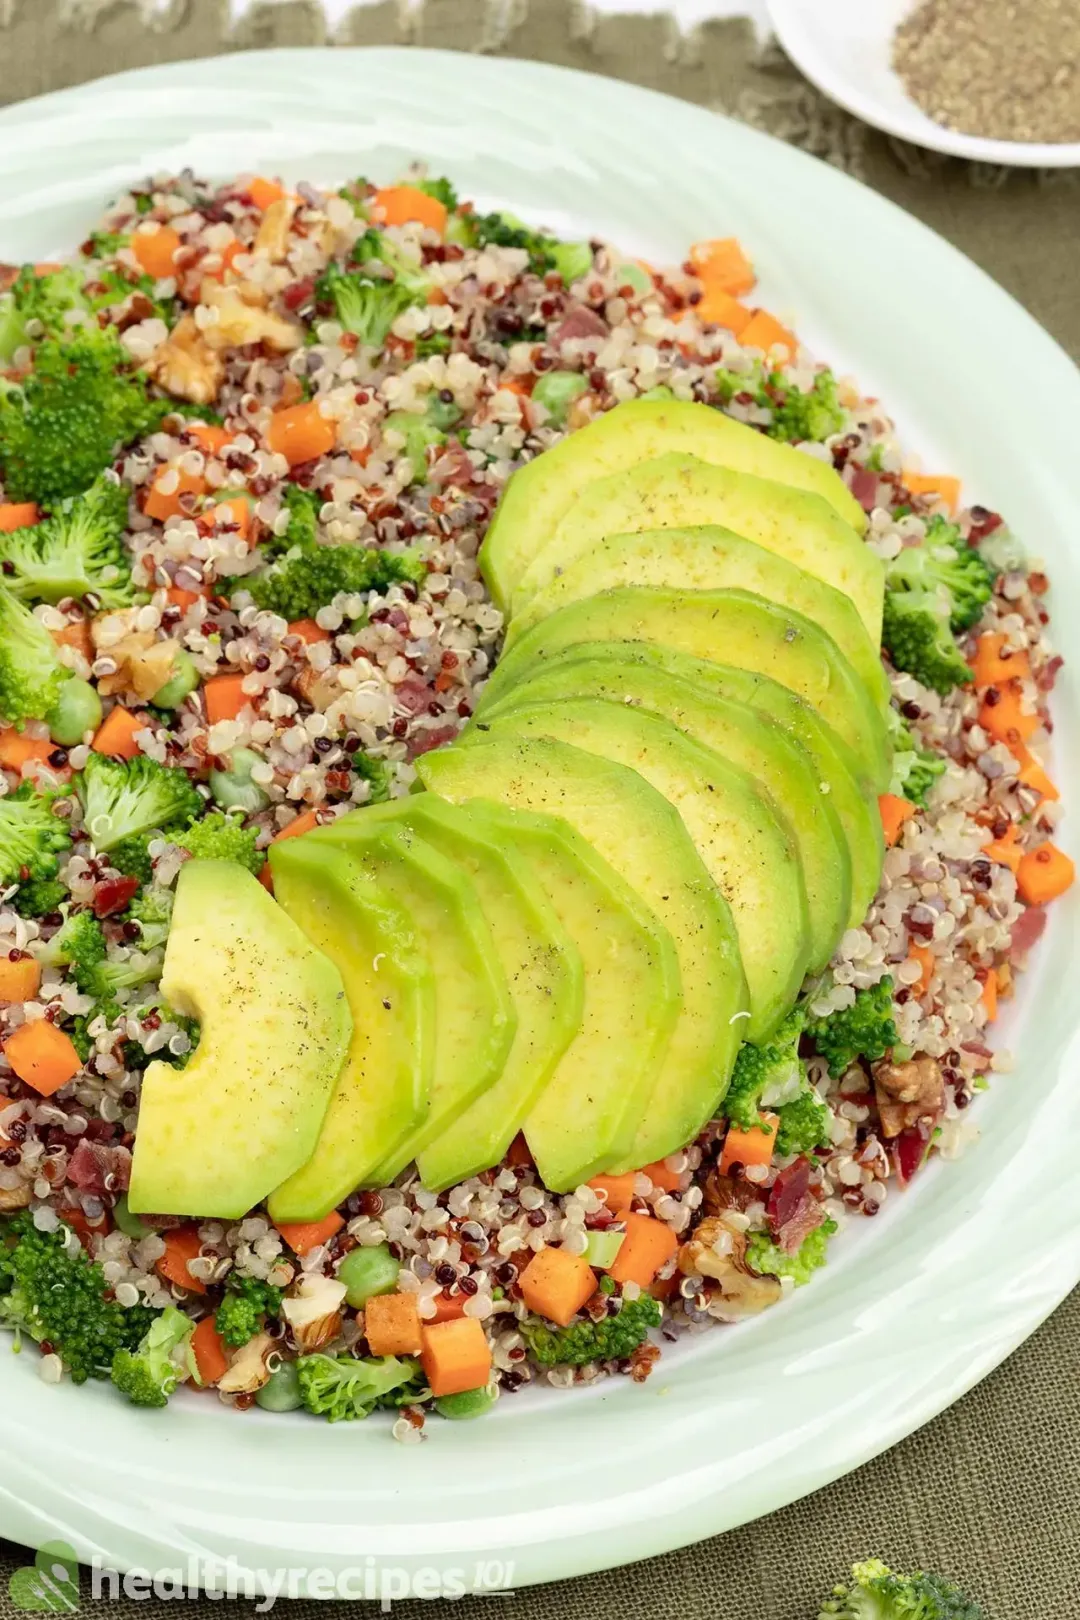 A colorful quinoa salad with sliced avocados on top.